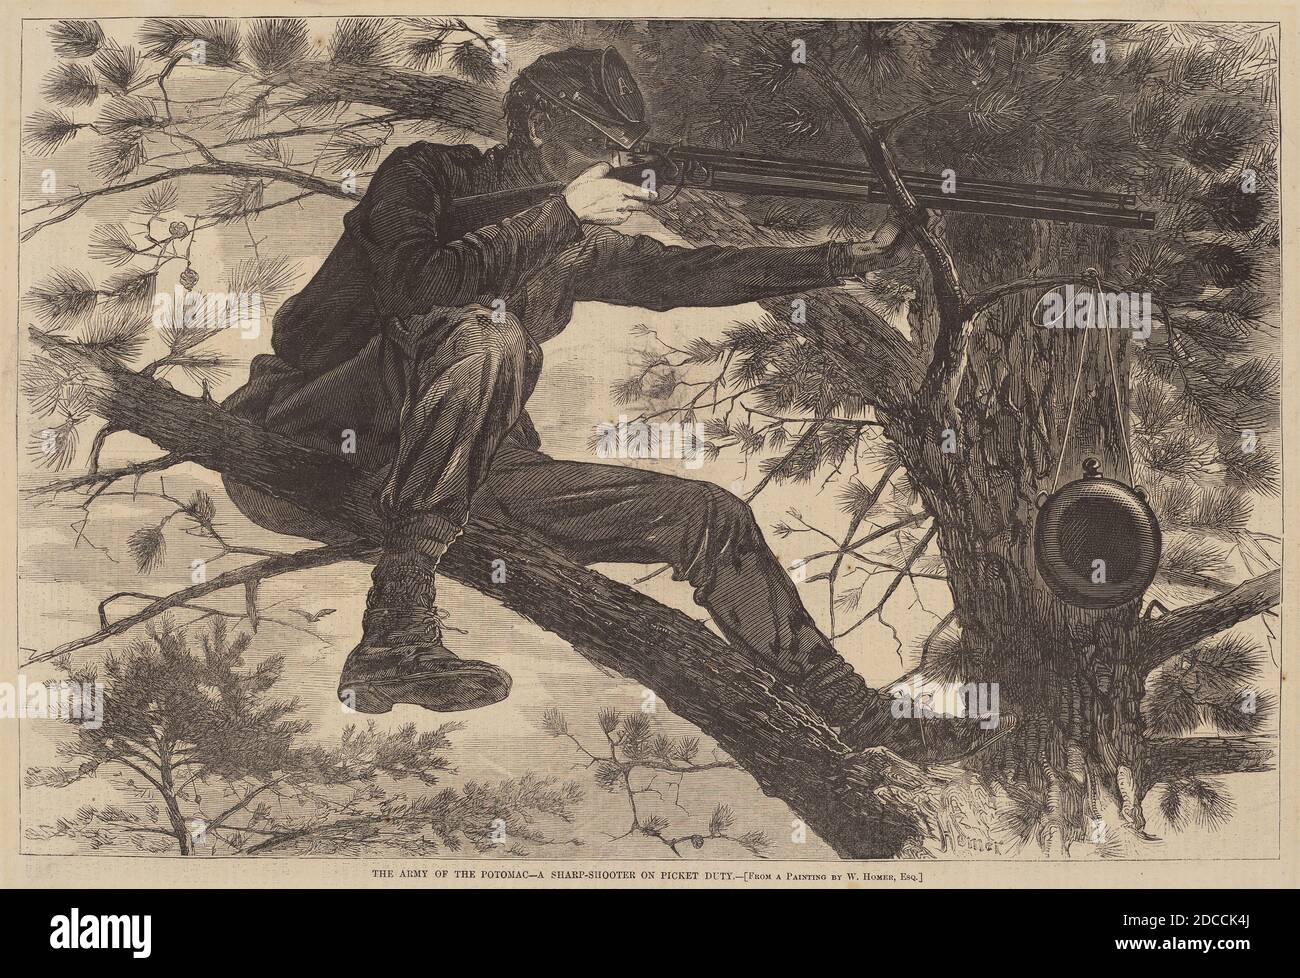 American 19th Century, (artista), Winslow Homer, (artista dopo), American, 1836 - 1910, The Army of the Potomac - A Sharp-Shooter on Picket Duty, from 'Harper's Weekly', 15 novembre 1862, p.724, (serie), pubblicato 1862, incisione in legno Foto Stock